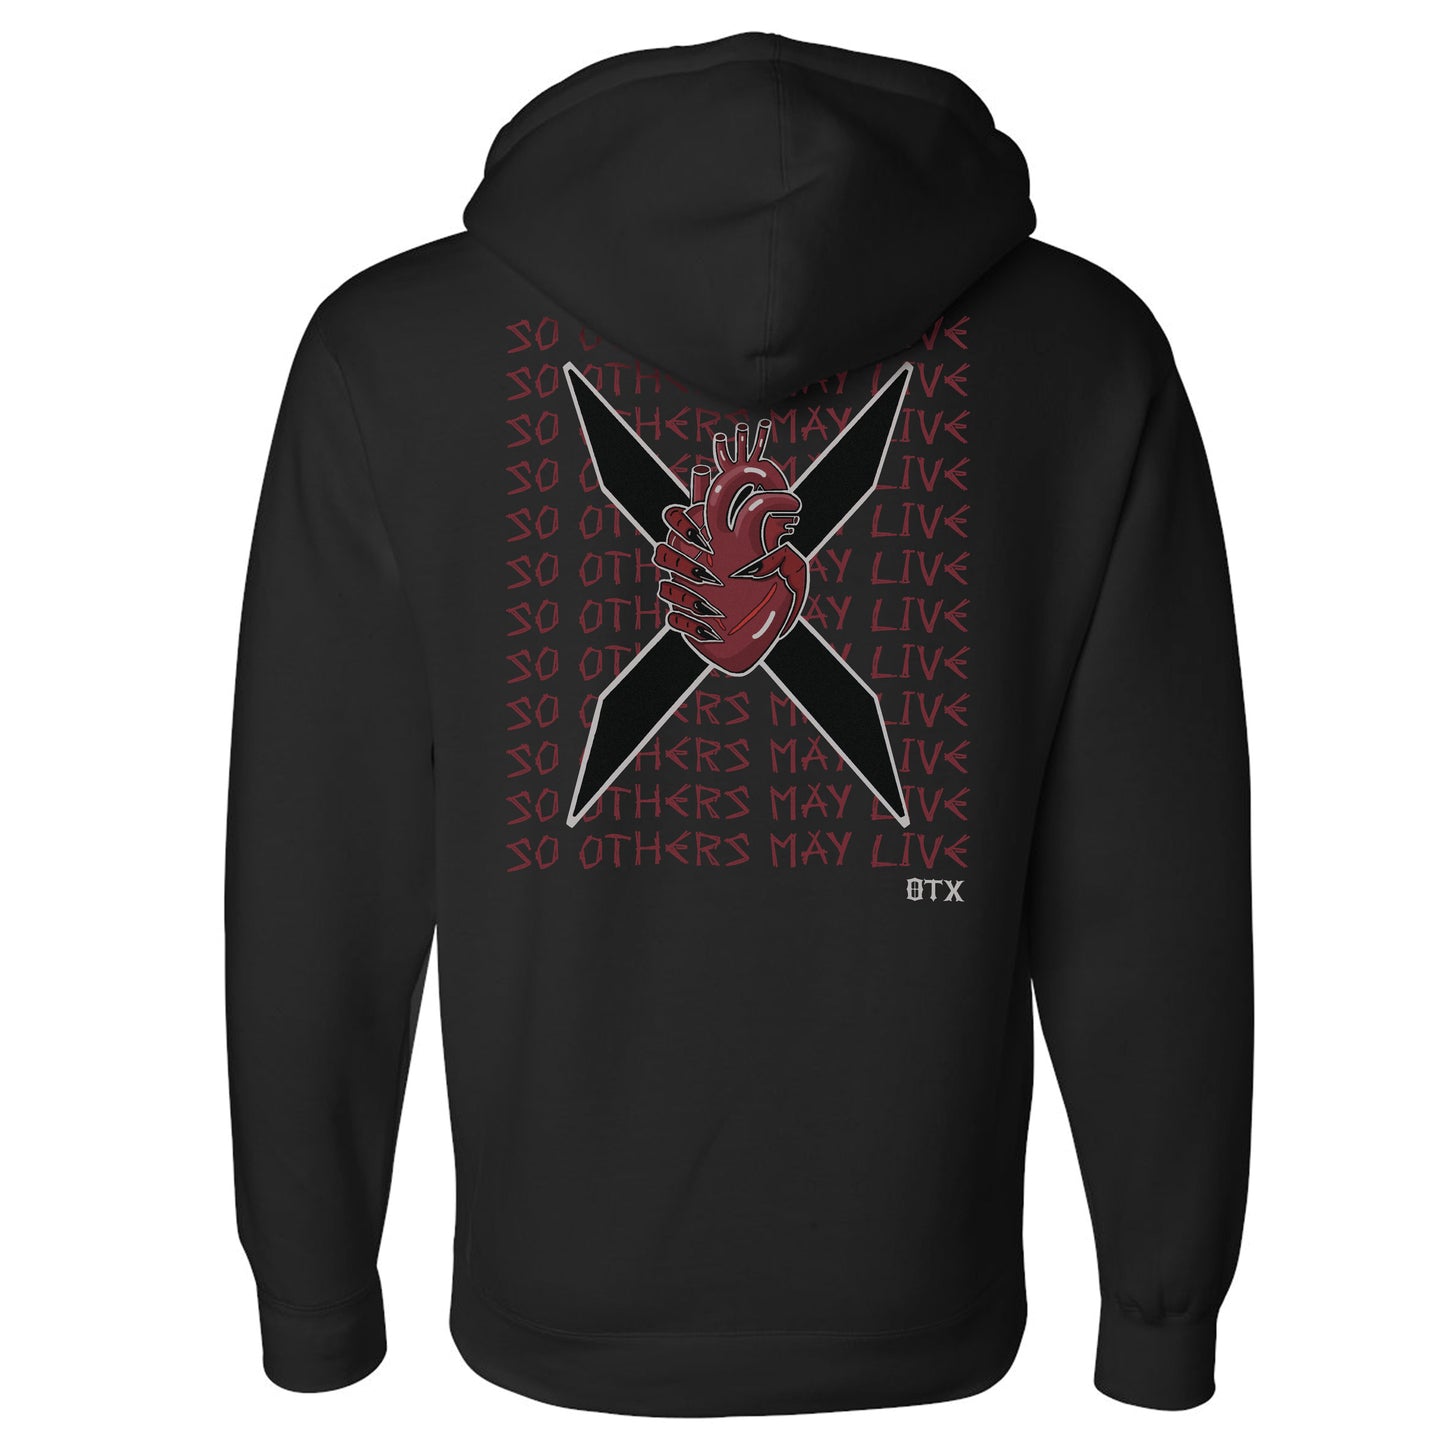 Others May Live Hoodie